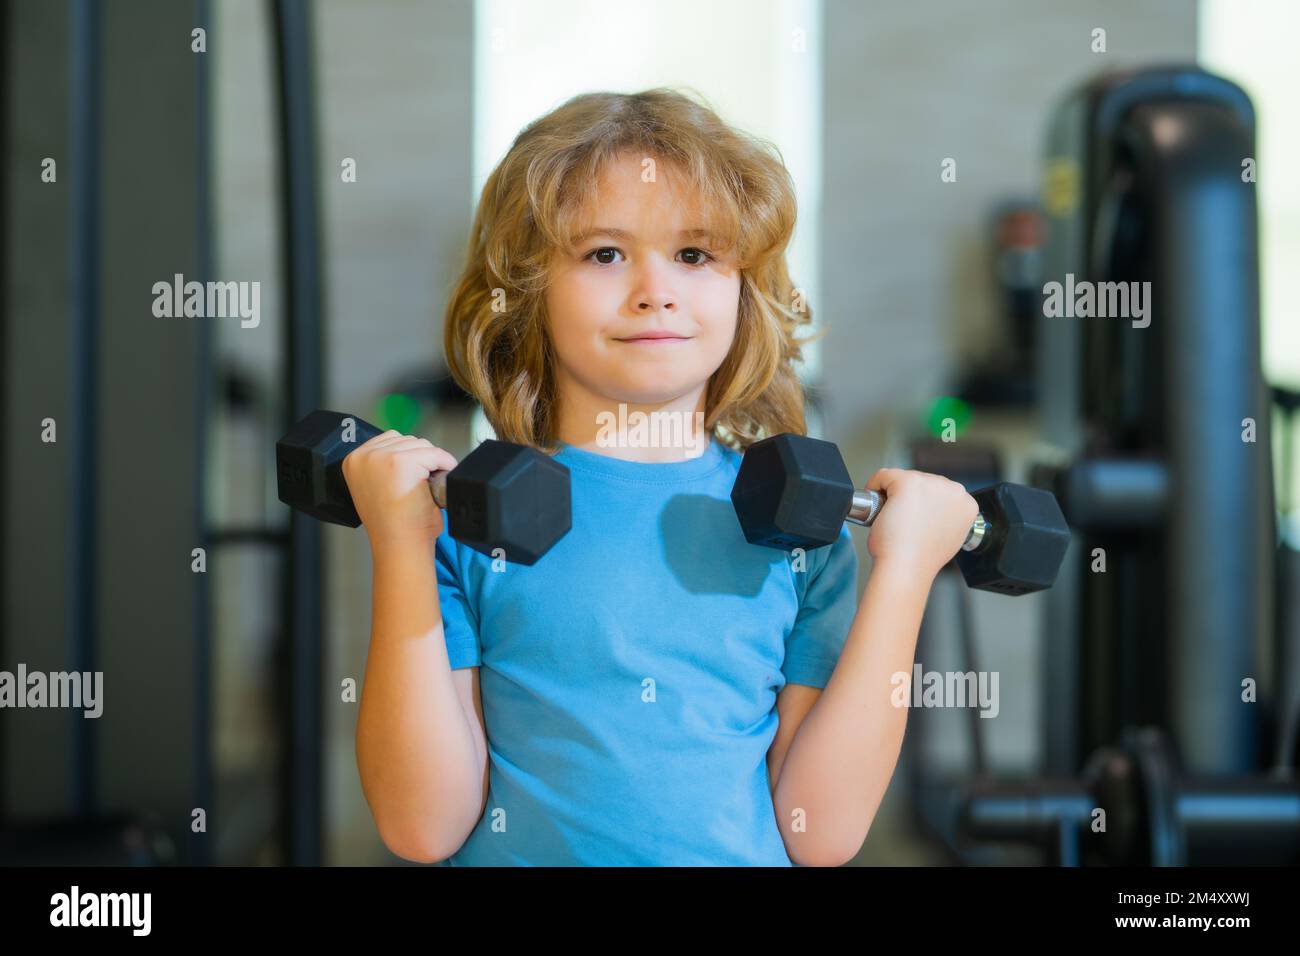 Sport activities at leisure with children. Blonde boy holding dumbbells. Sports exercises for children. Funny child lifting the dumbbells. Stock Photo